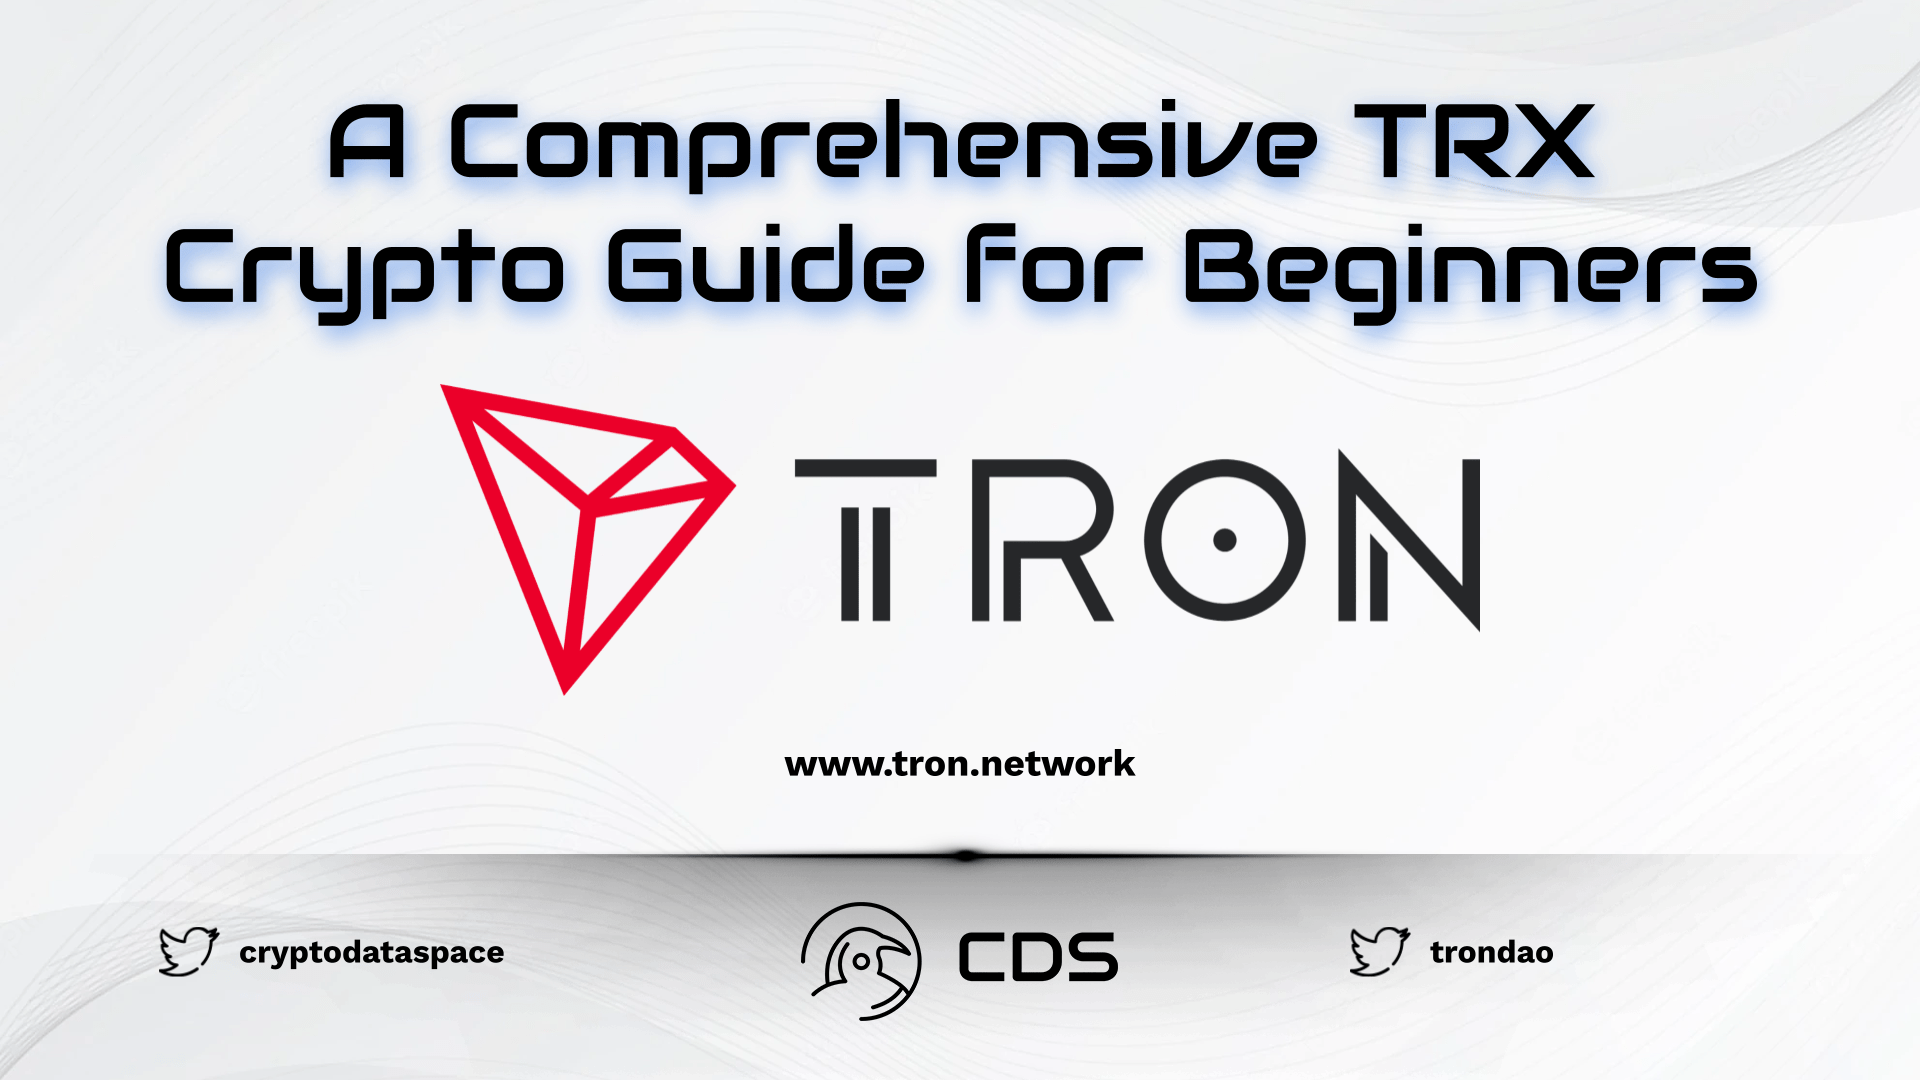 A Comprehensive TRX Crypto Guide for Beginners